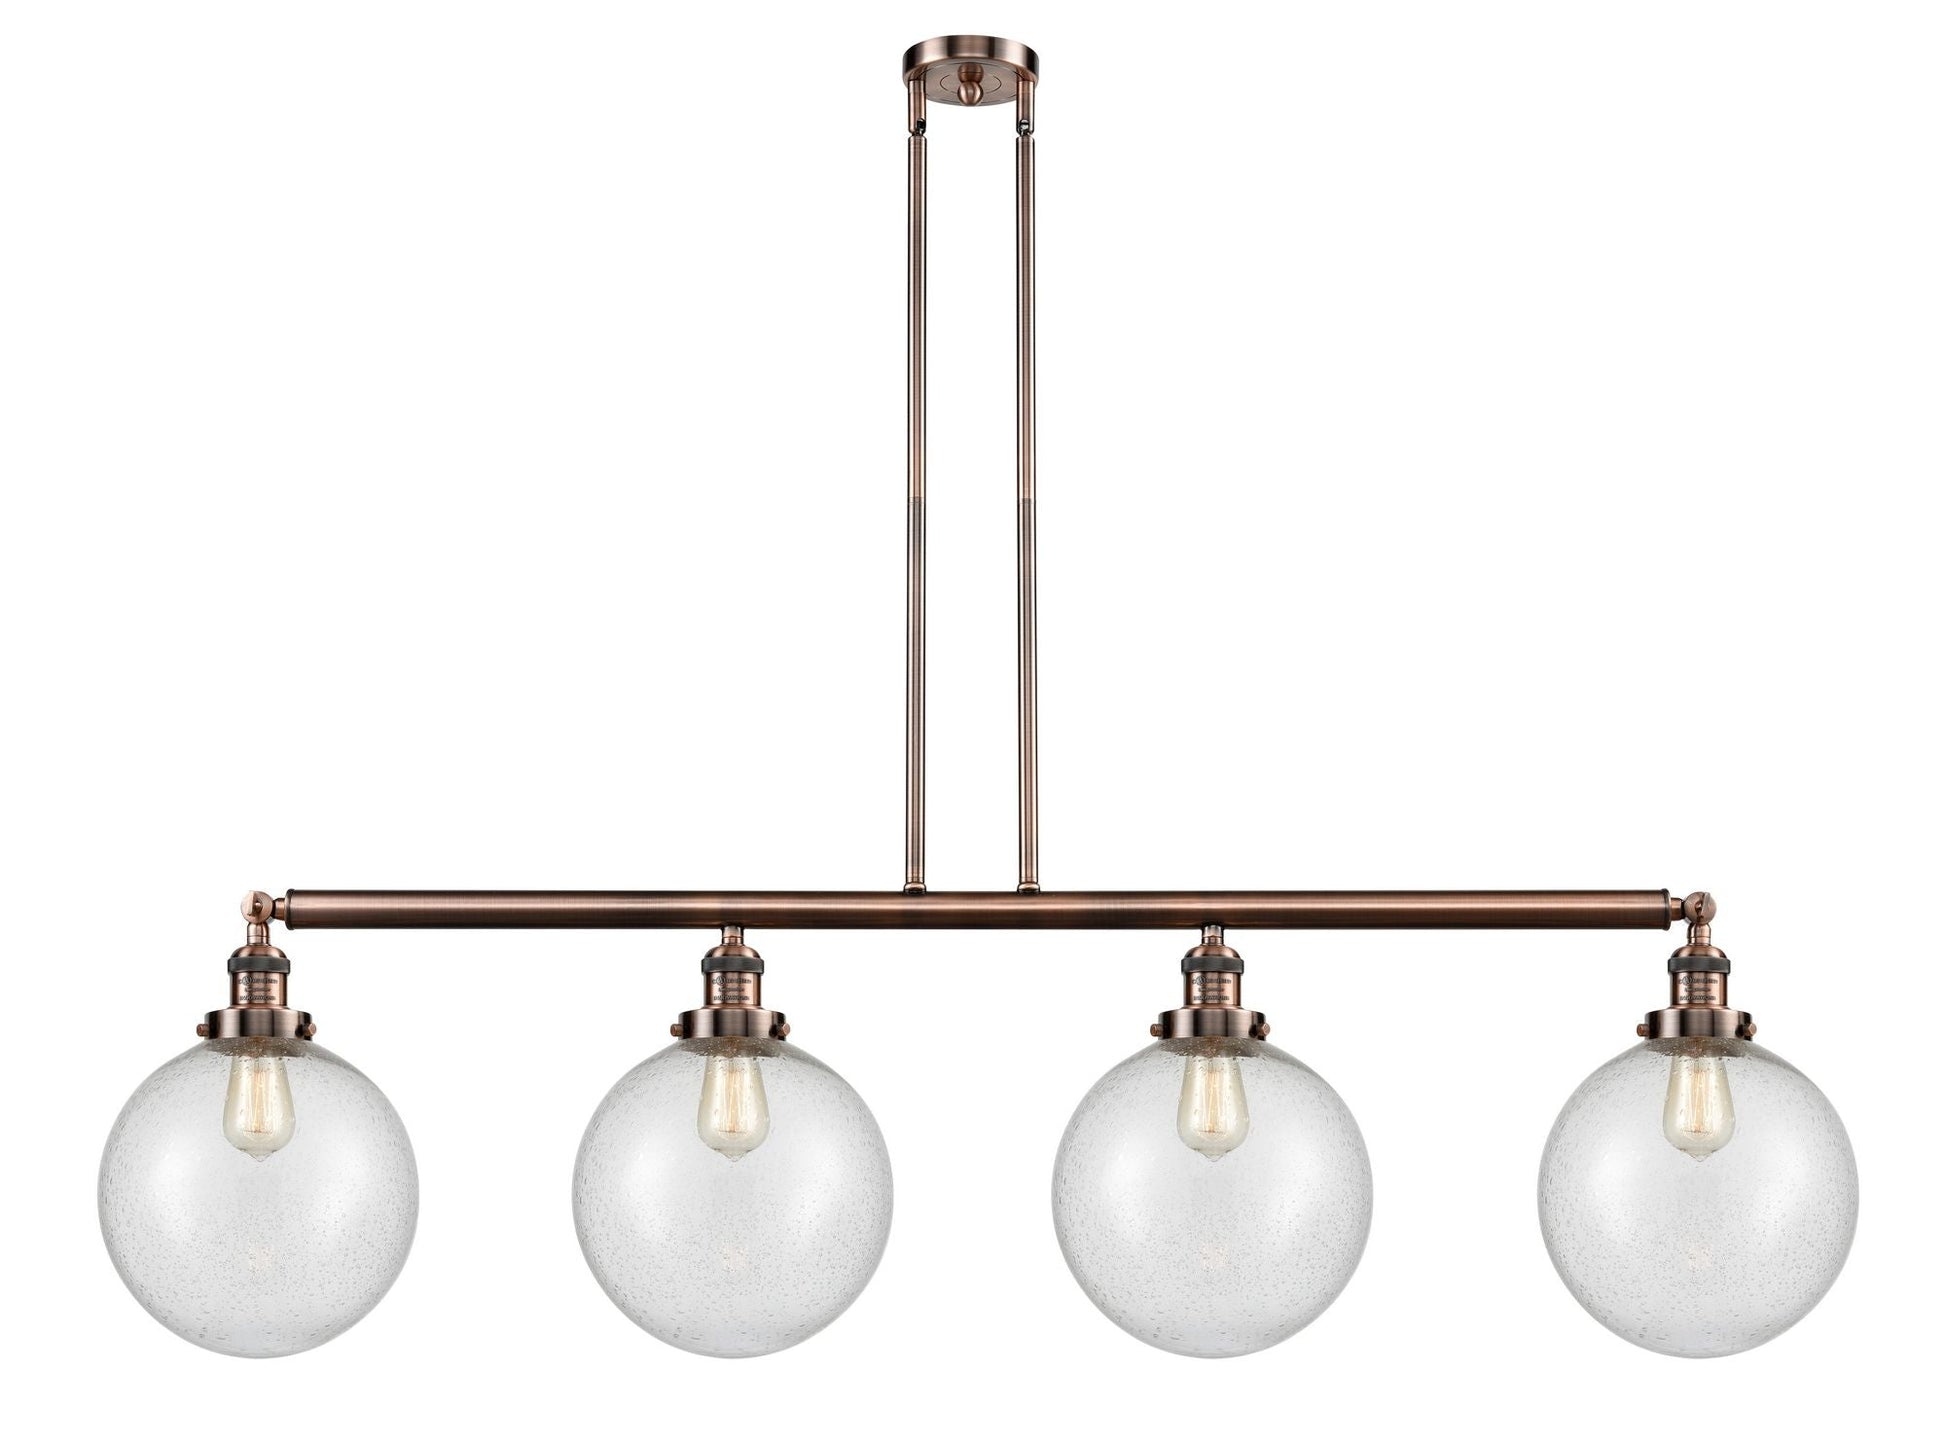 214-AC-G204-10 4-Light 54" Antique Copper Island Light - Seedy Beacon Glass - LED Bulb - Dimmensions: 54 x 10 x 14<br>Minimum Height : 24<br>Maximum Height : 48 - Sloped Ceiling Compatible: Yes